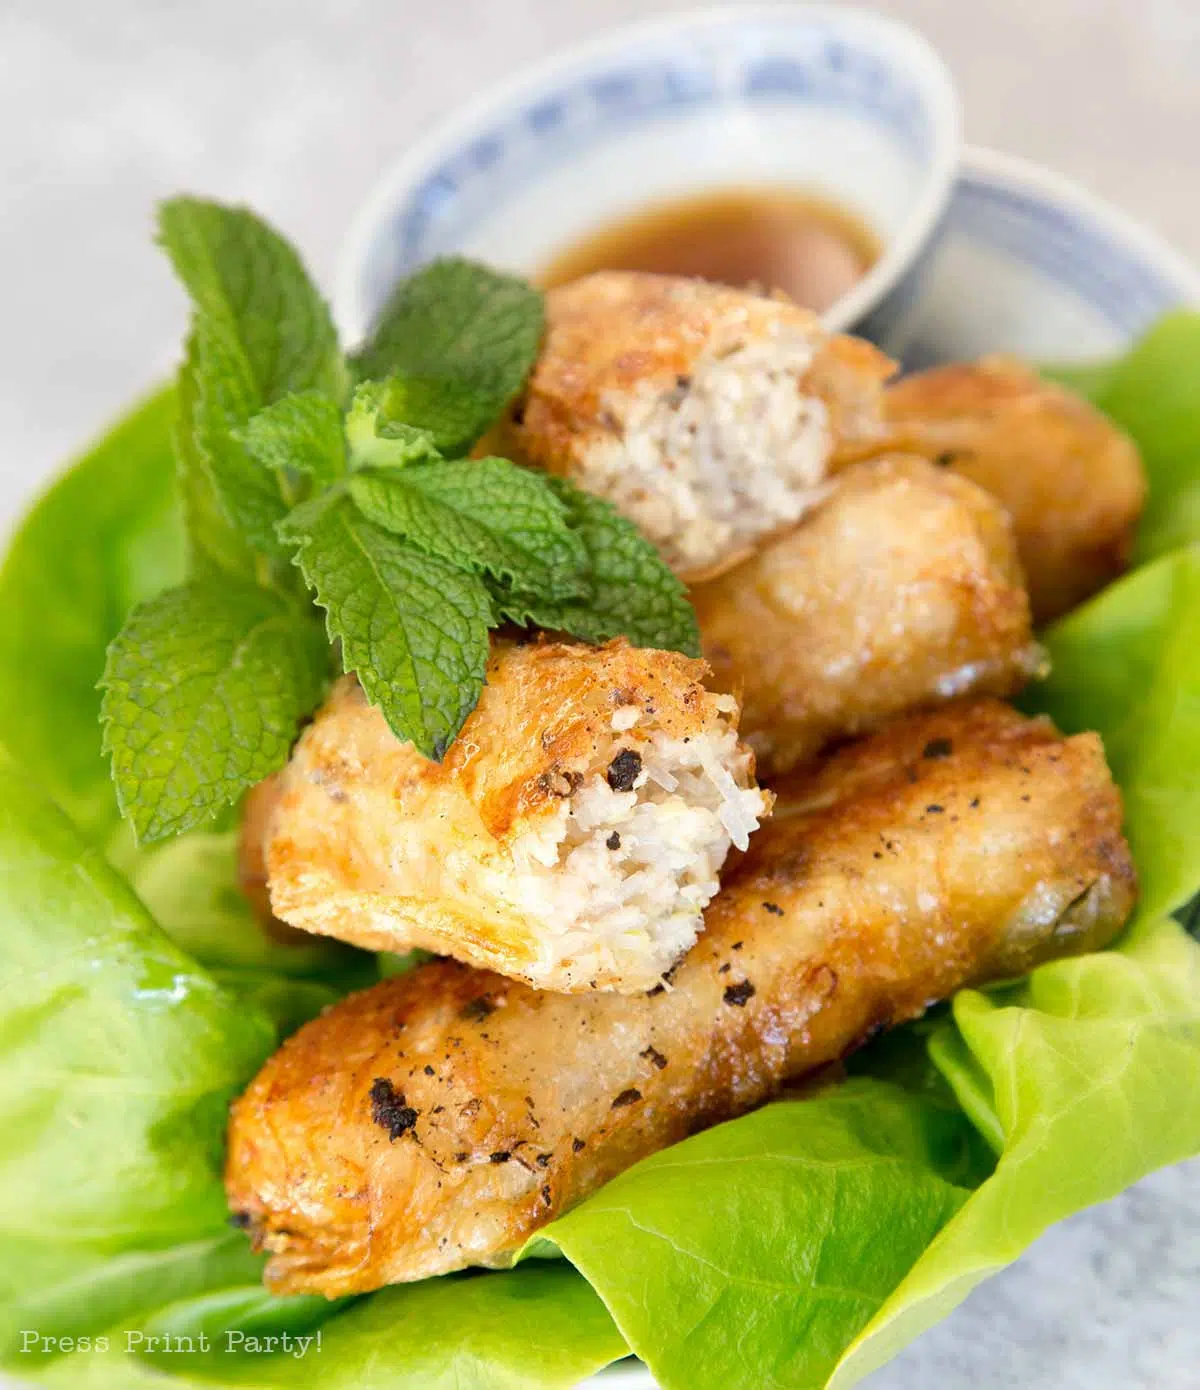 fried vietnamese egg rolls on plate with dip mint and lettuce- How to make vietnamese egg rolls recipe cha gio nem ran - Press Print Party!